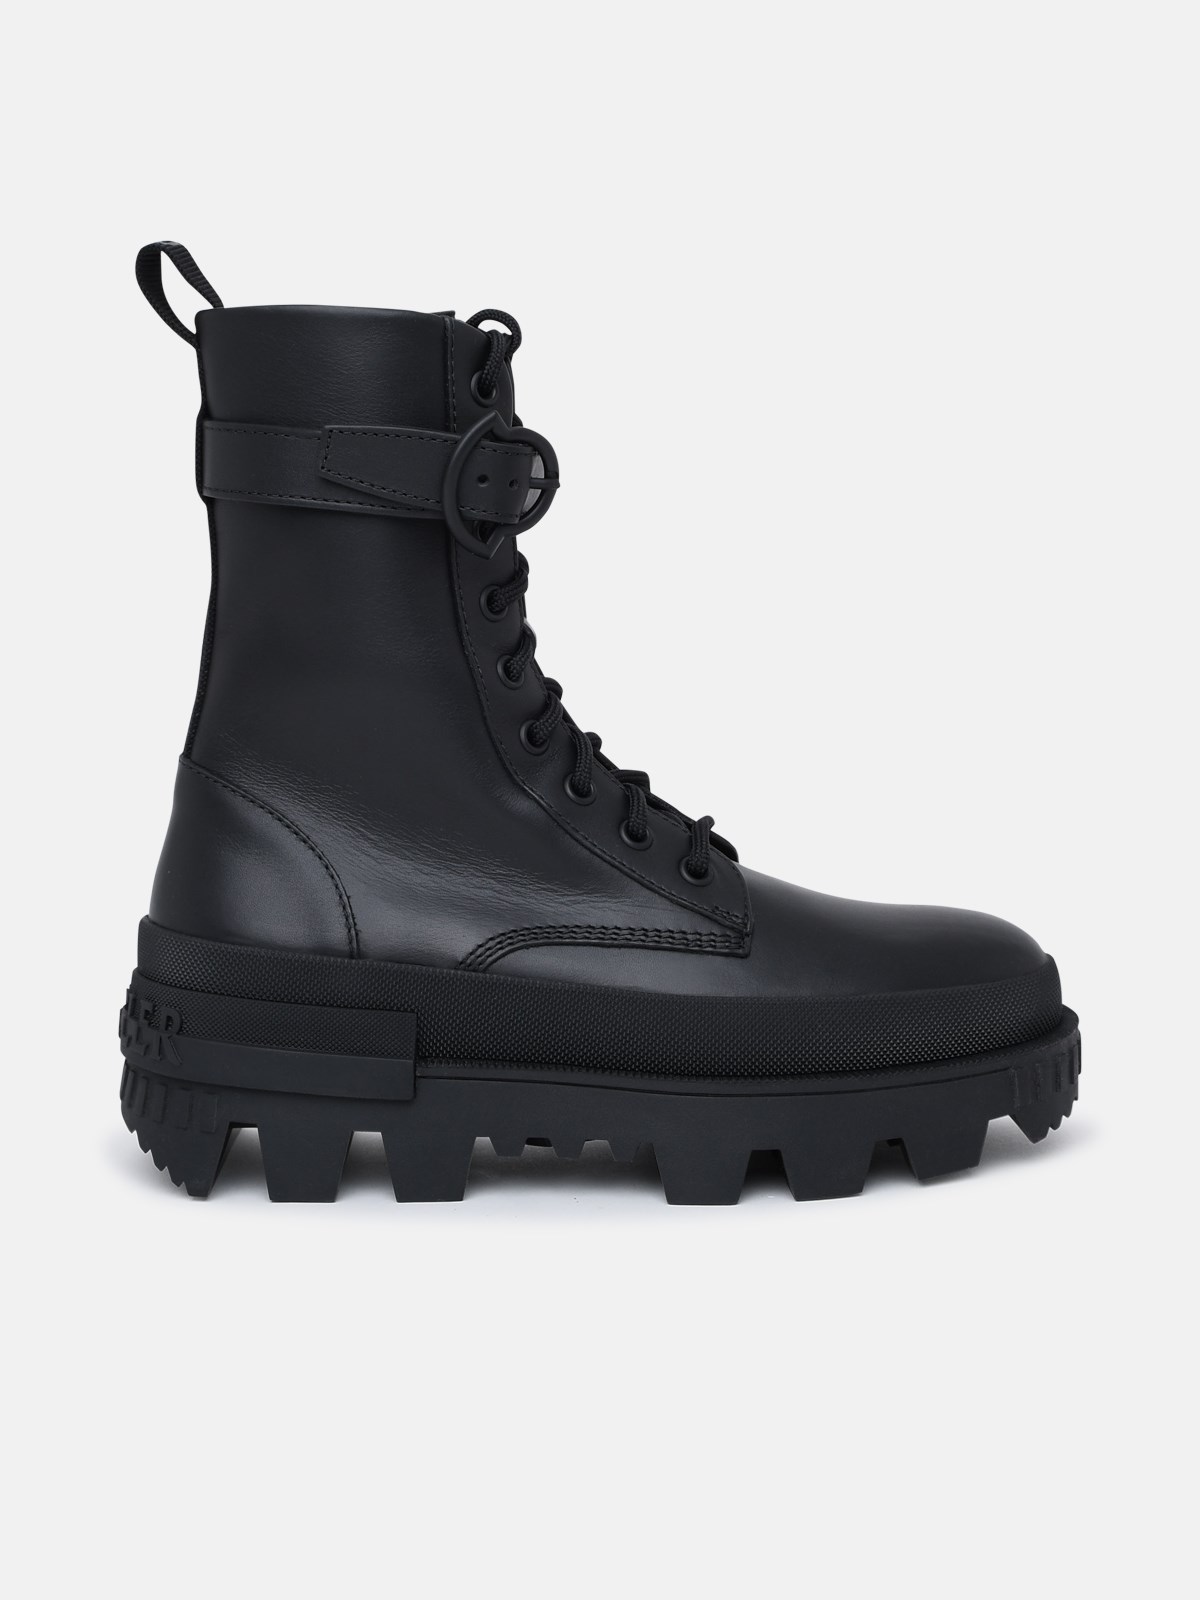 Moncler Black Leather Carinne Boots